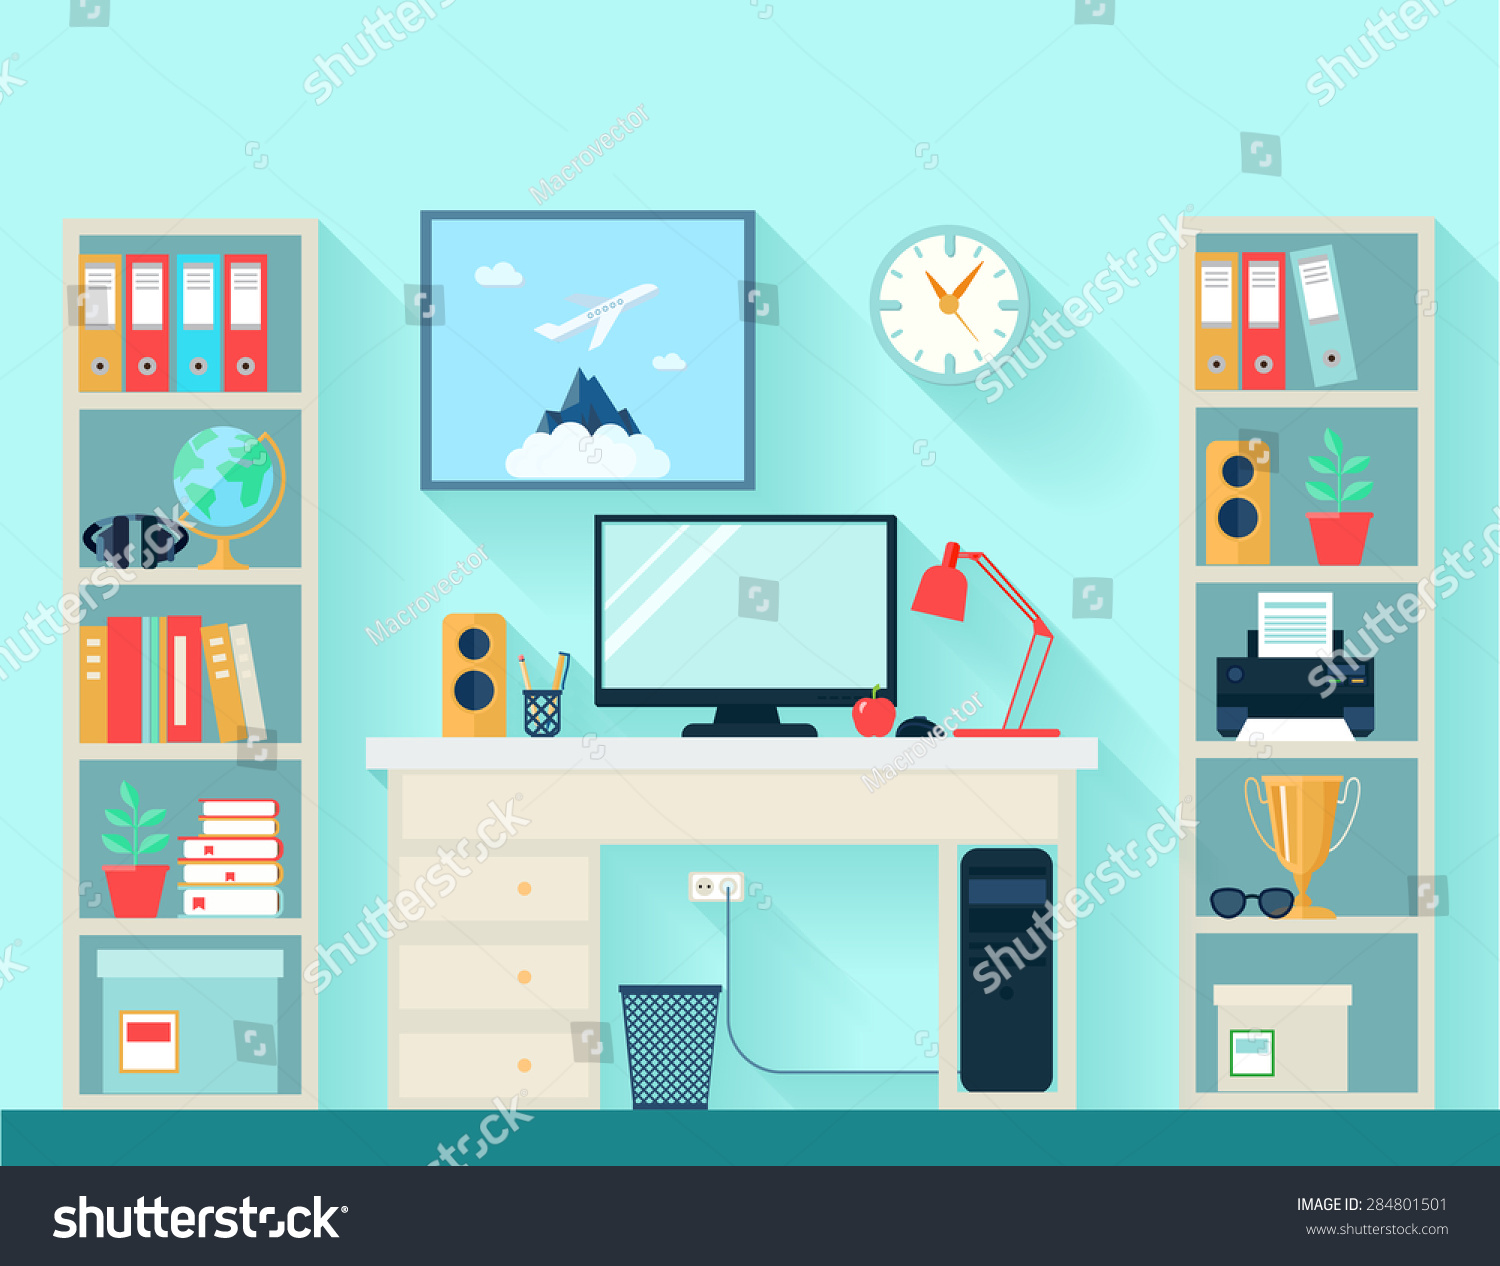 stock vector workspace in room with computer table and bookshelves on blue wallpaper background flat vector 284801501